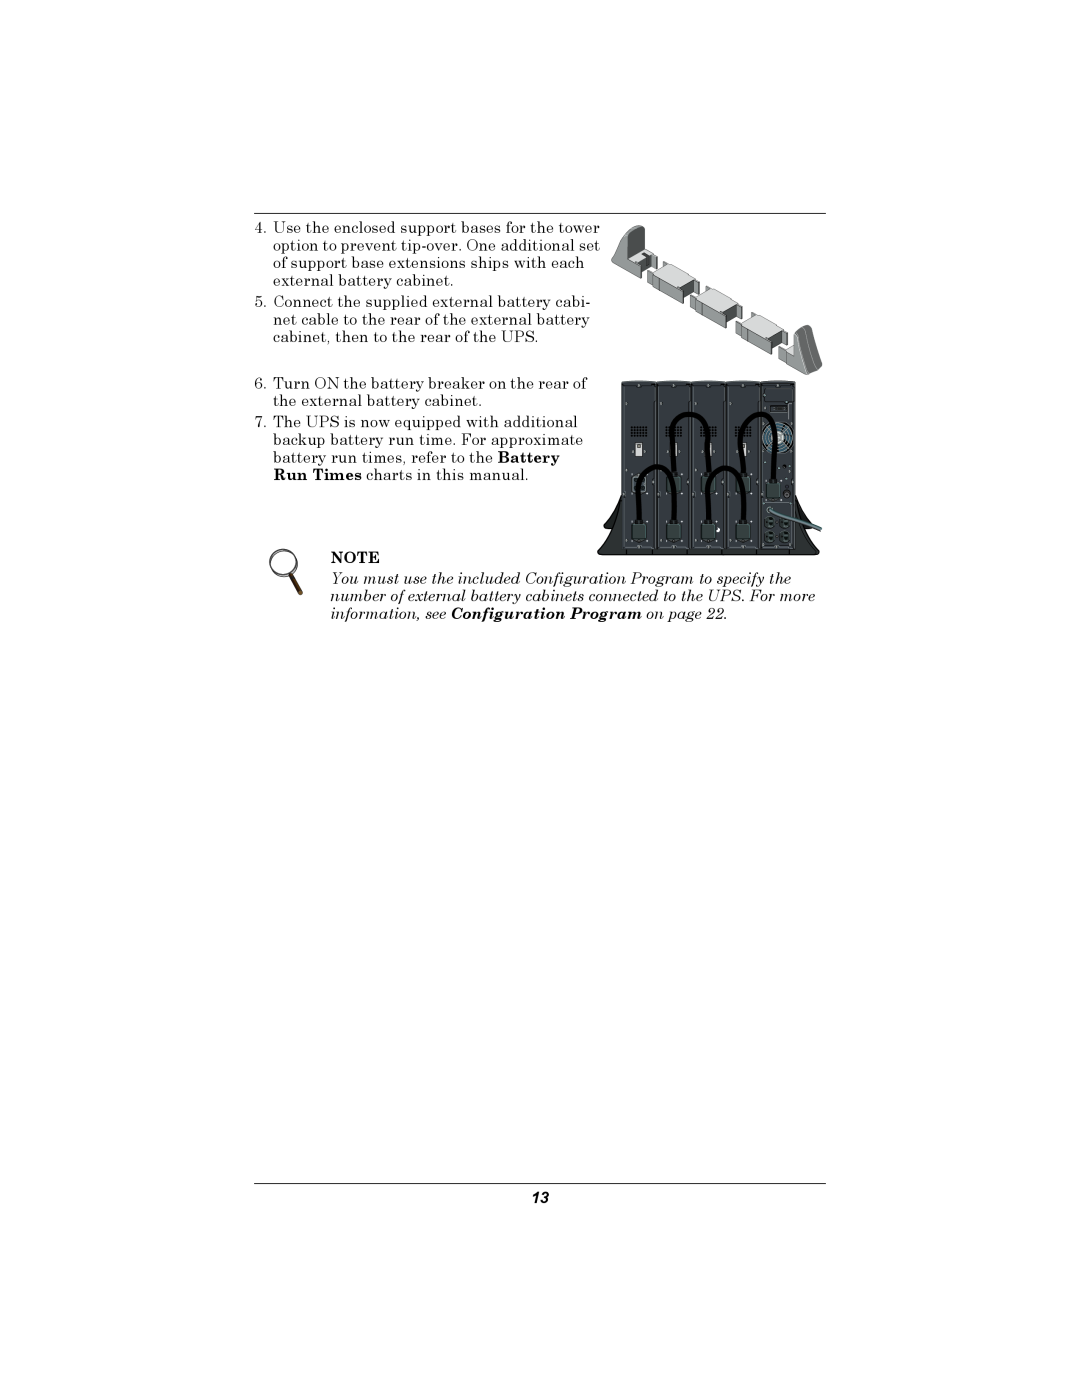 Emerson GXT2U user manual of support base extensions ships with each external battery cabinet 